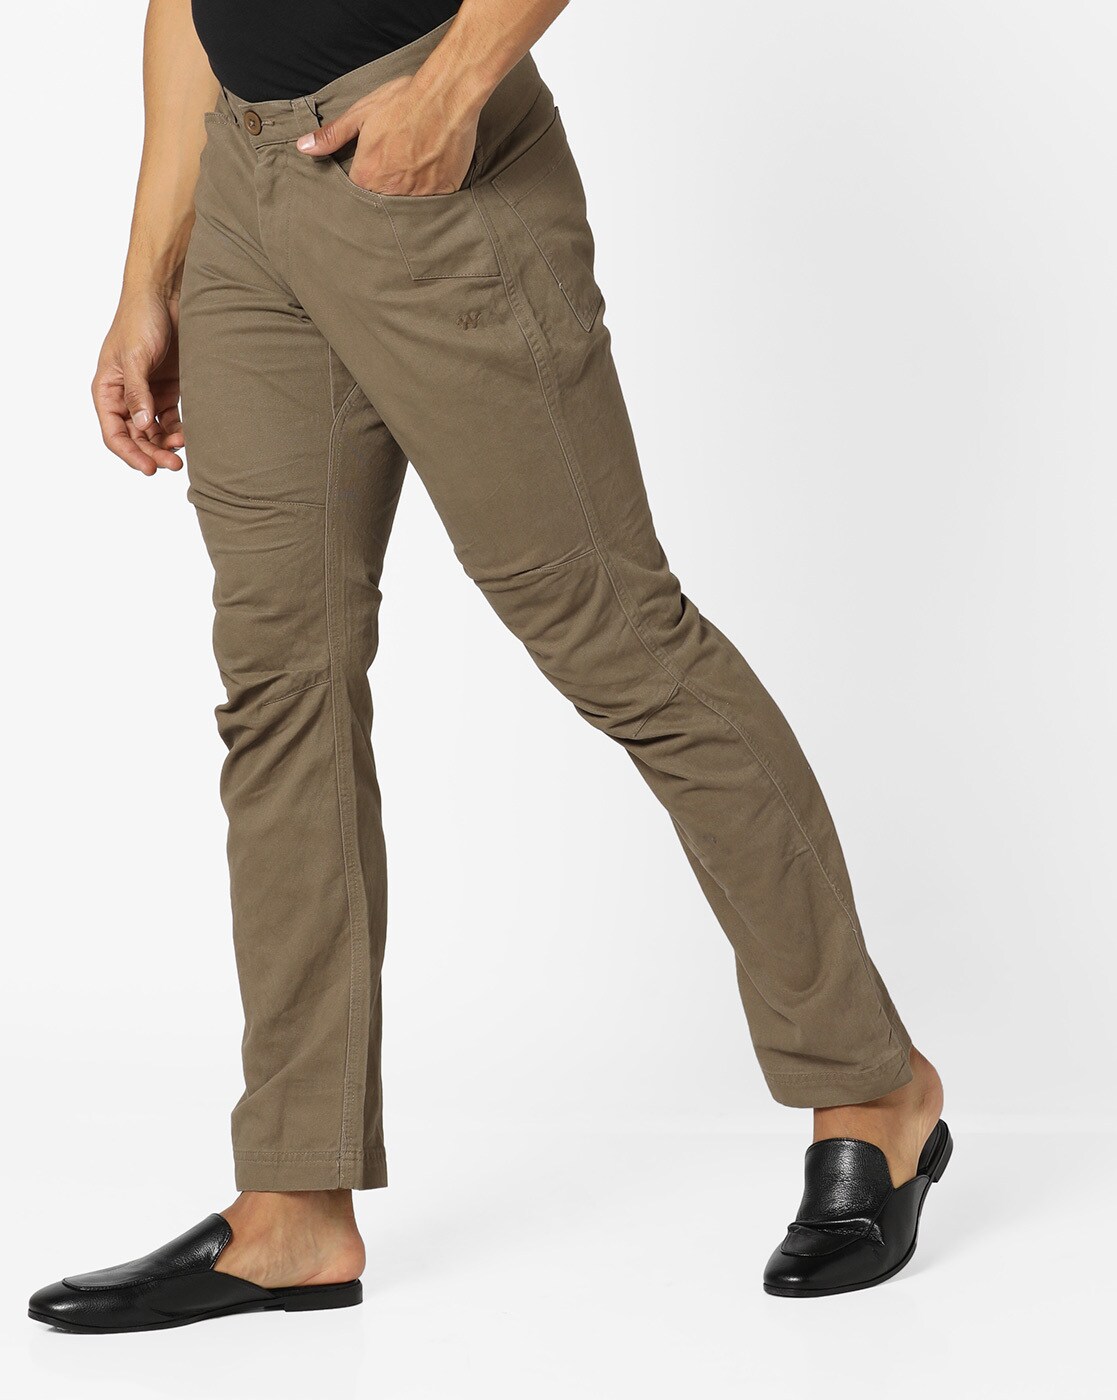 Buy Wildcraft Trousers online  Men  128 products  FASHIOLAin